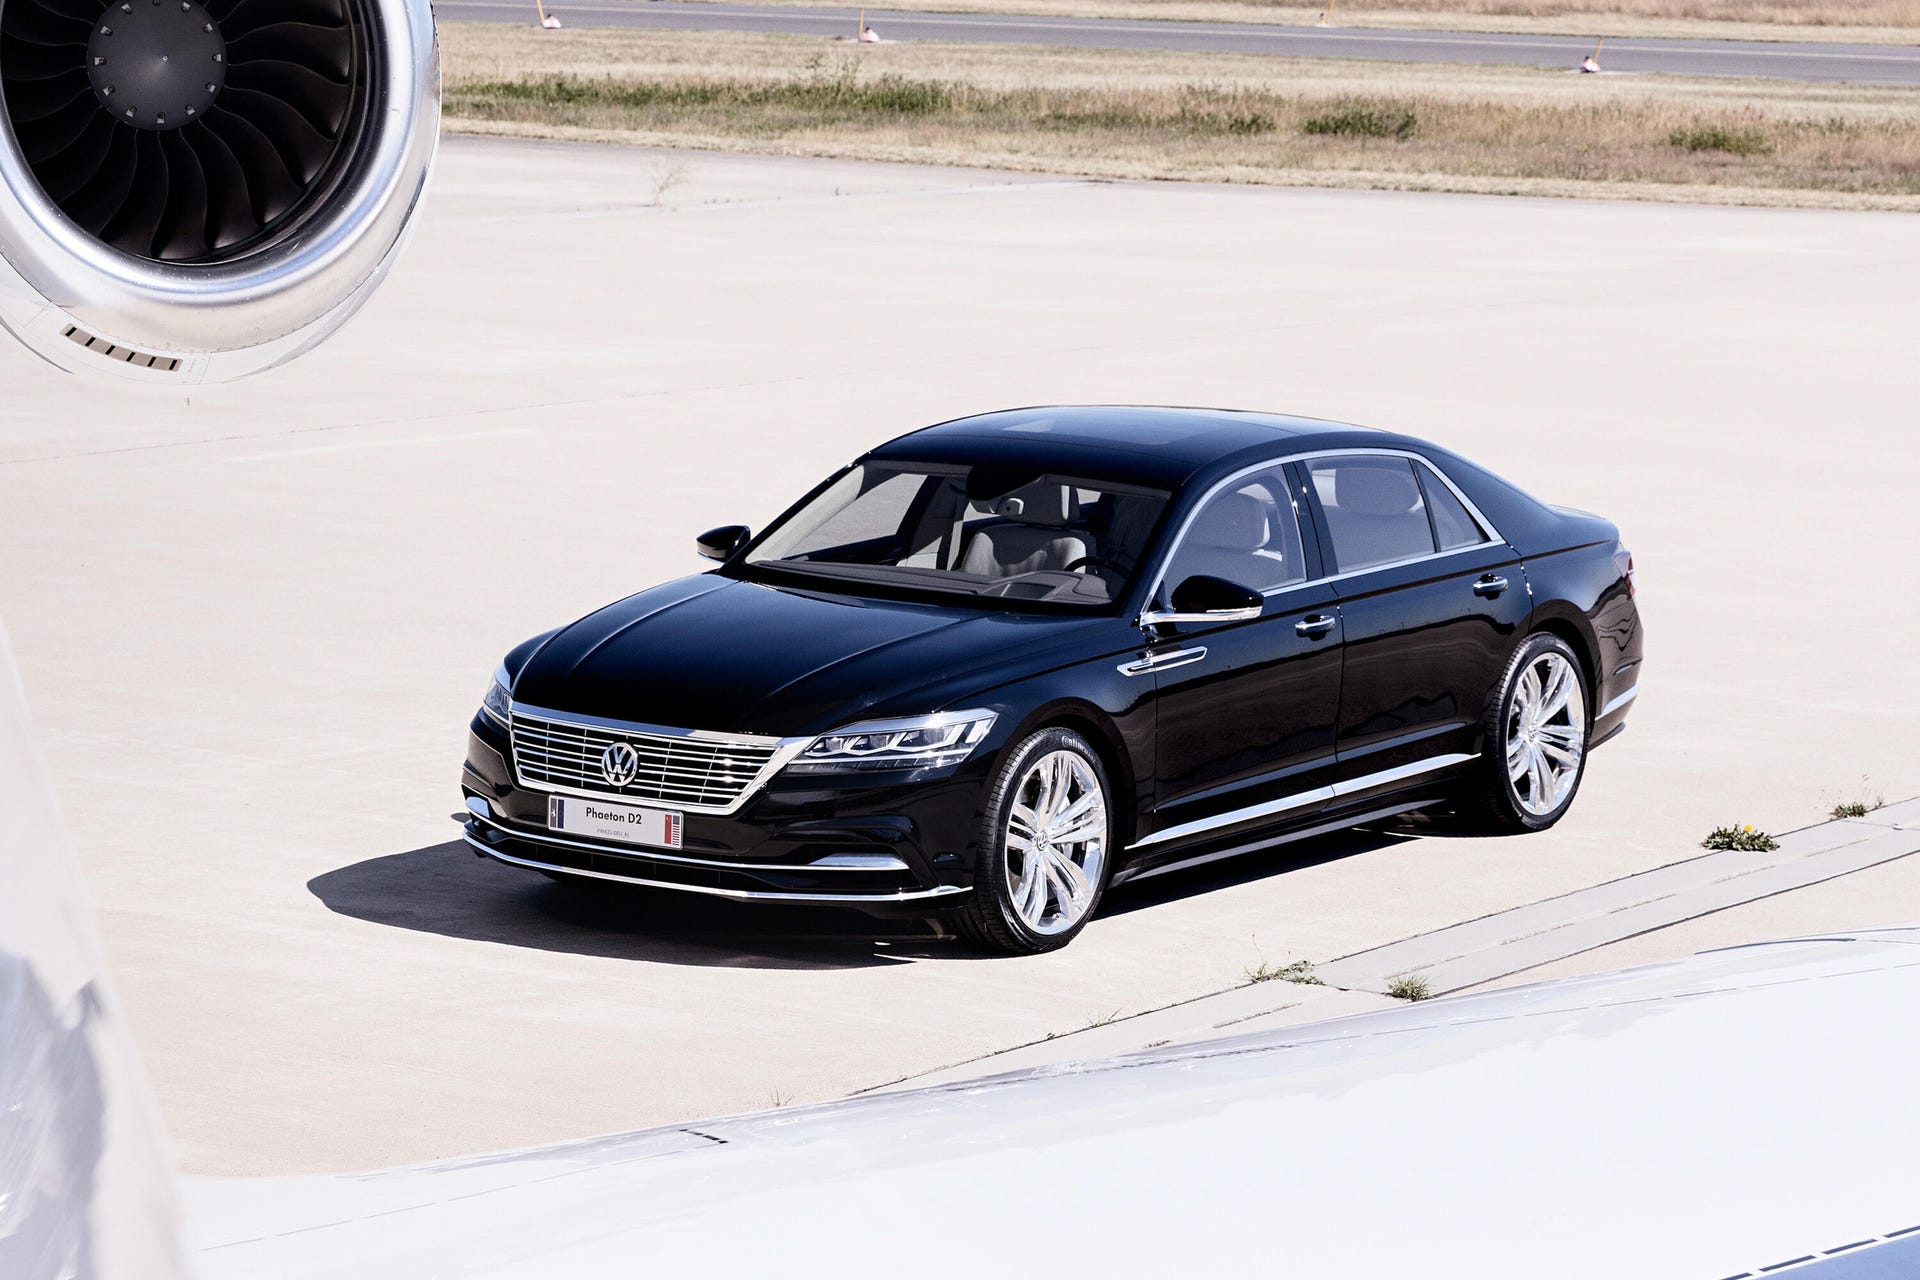 Front 3/4 view of a black Volkswagen Phaeton D2 prototype posed behind an airplane wing